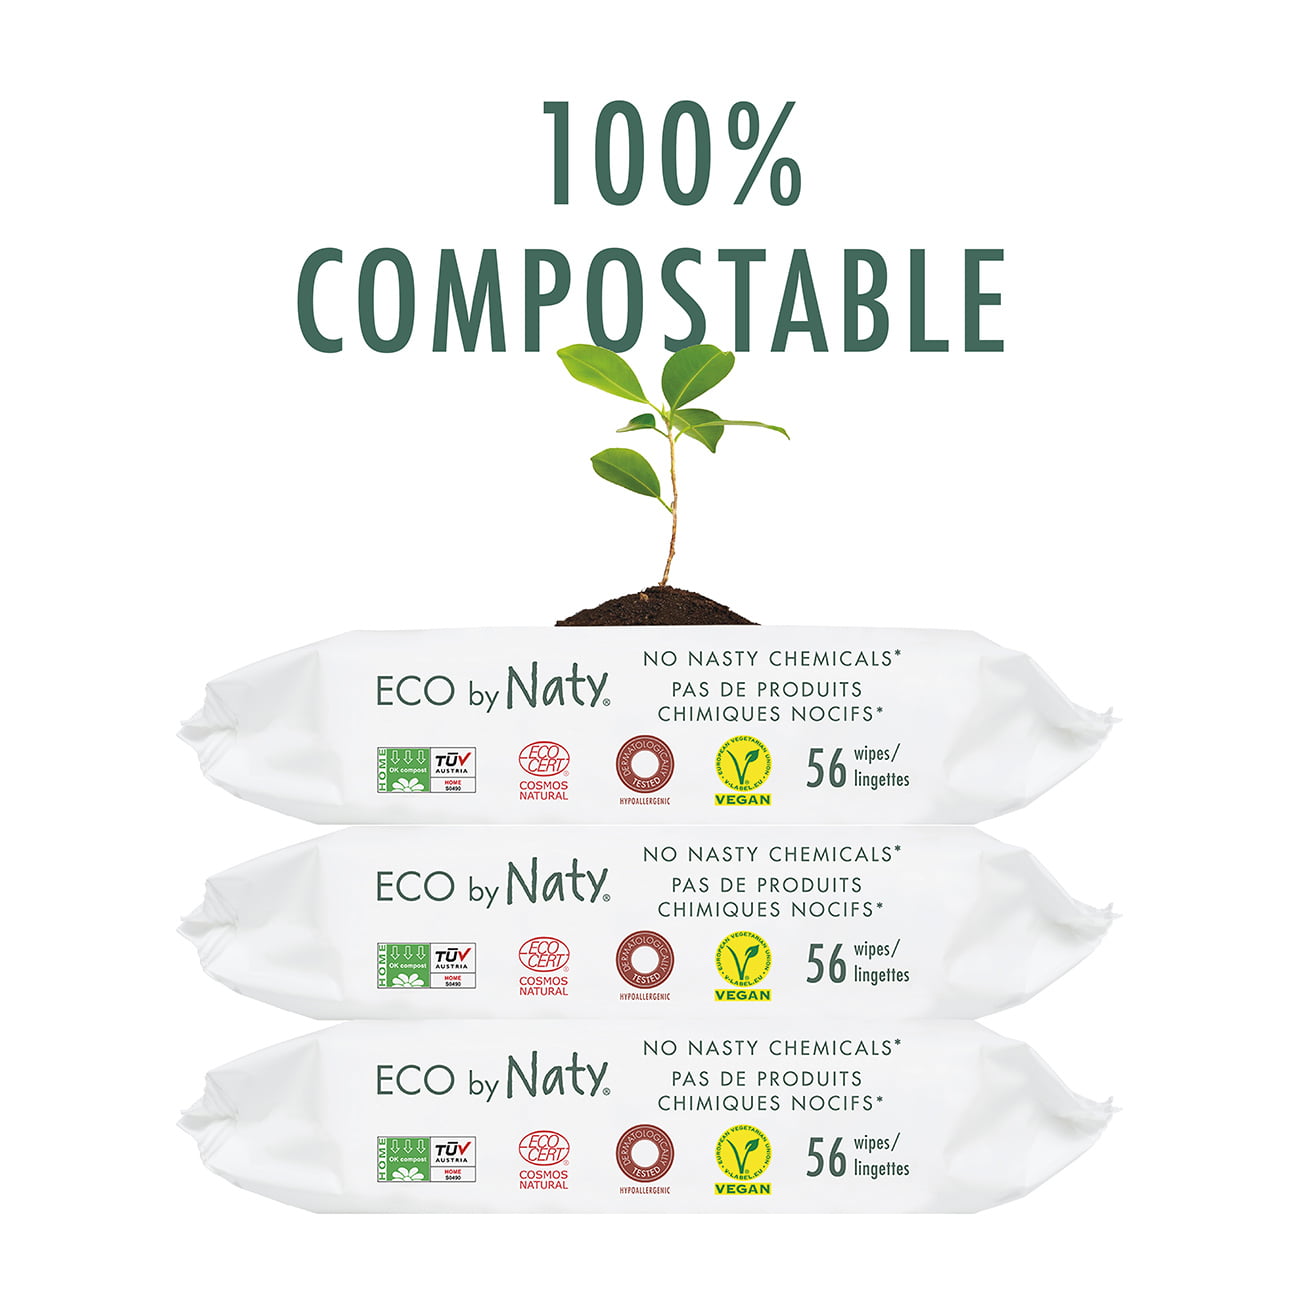 No nasty chemicals. Eco by Naty Flushable Baby Wipes 0 percent plastic Plant based Compostable Wipes 672 count 12 packs of 56